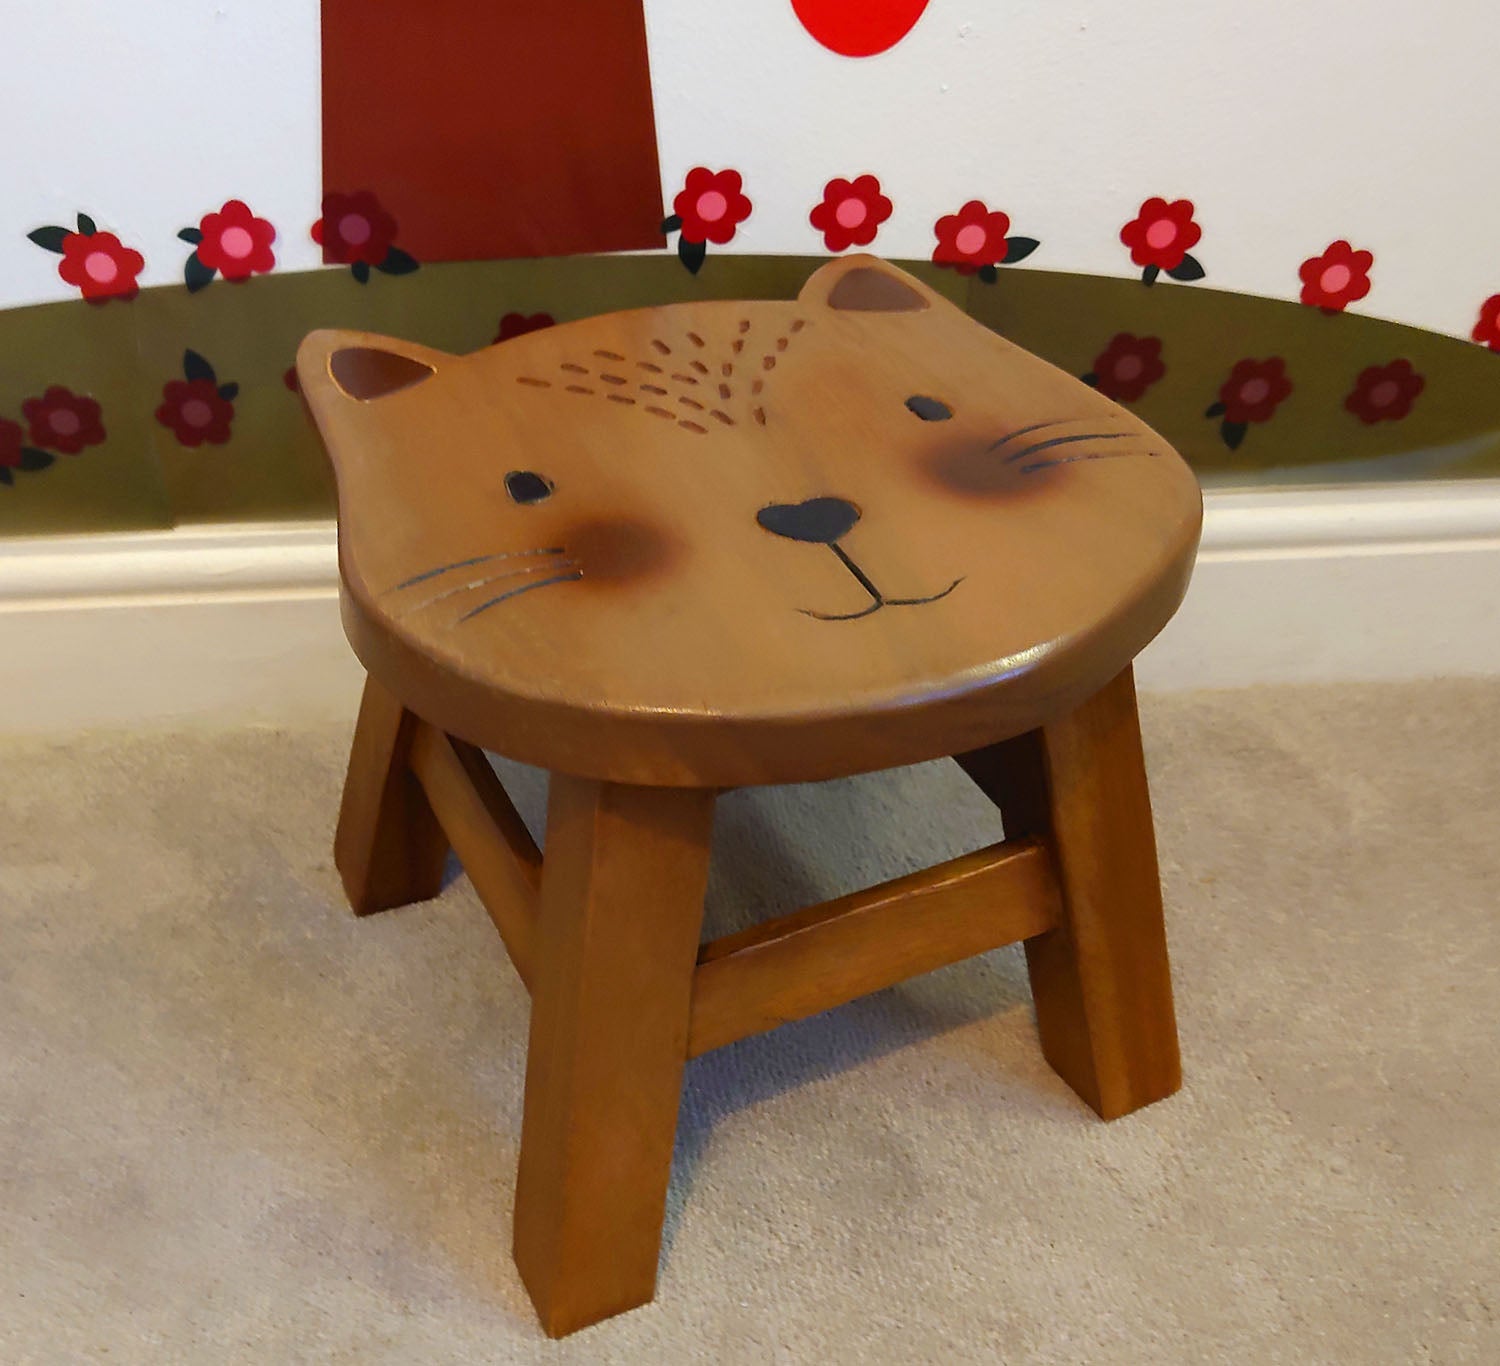 Footstool for Children with smiling cat design